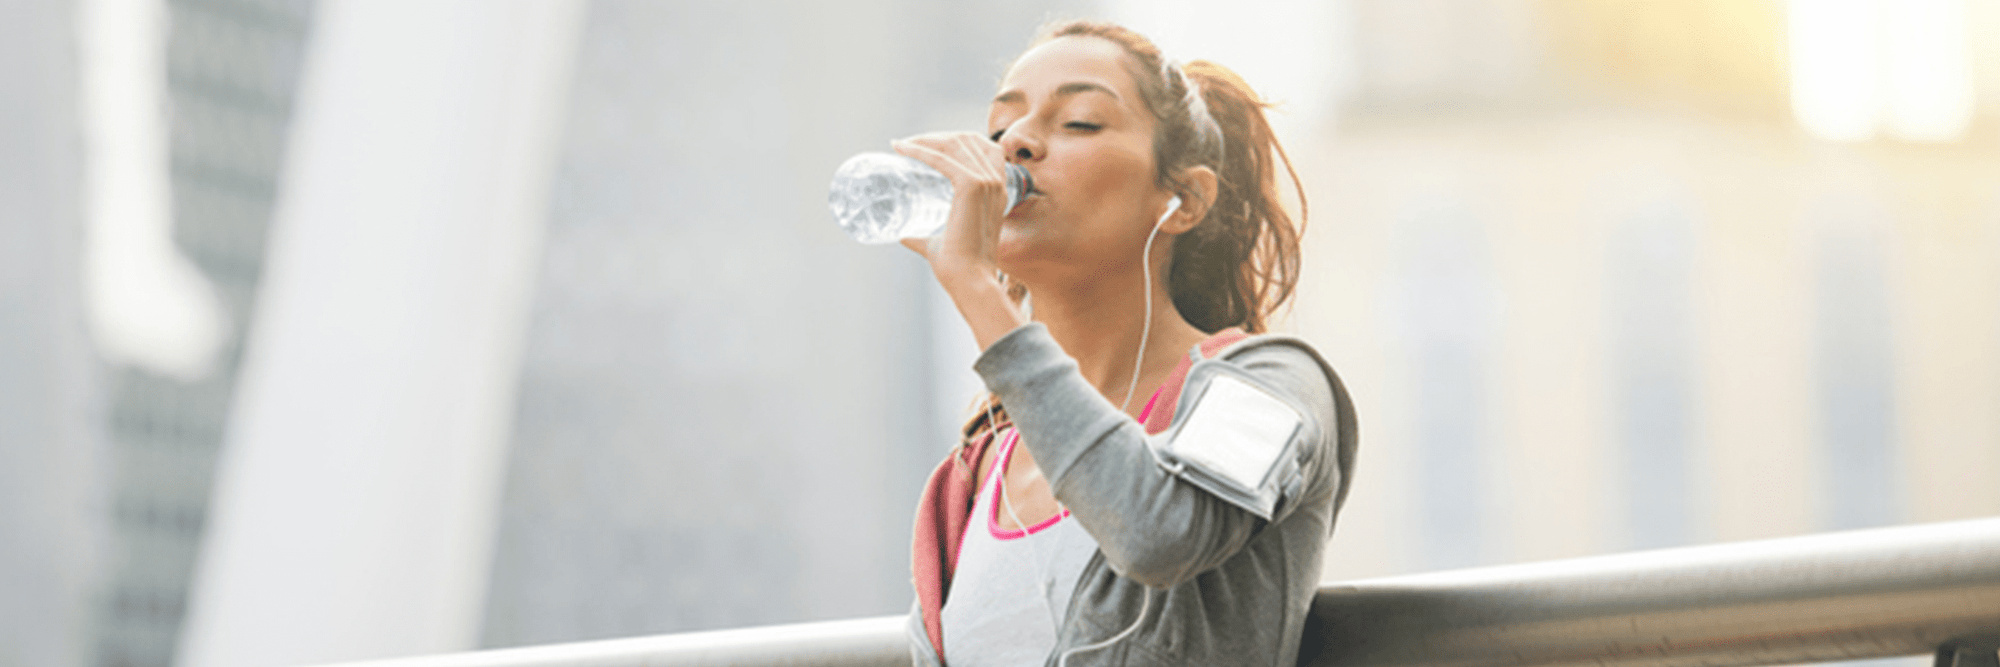 Healthy woman drinking water on a city street.